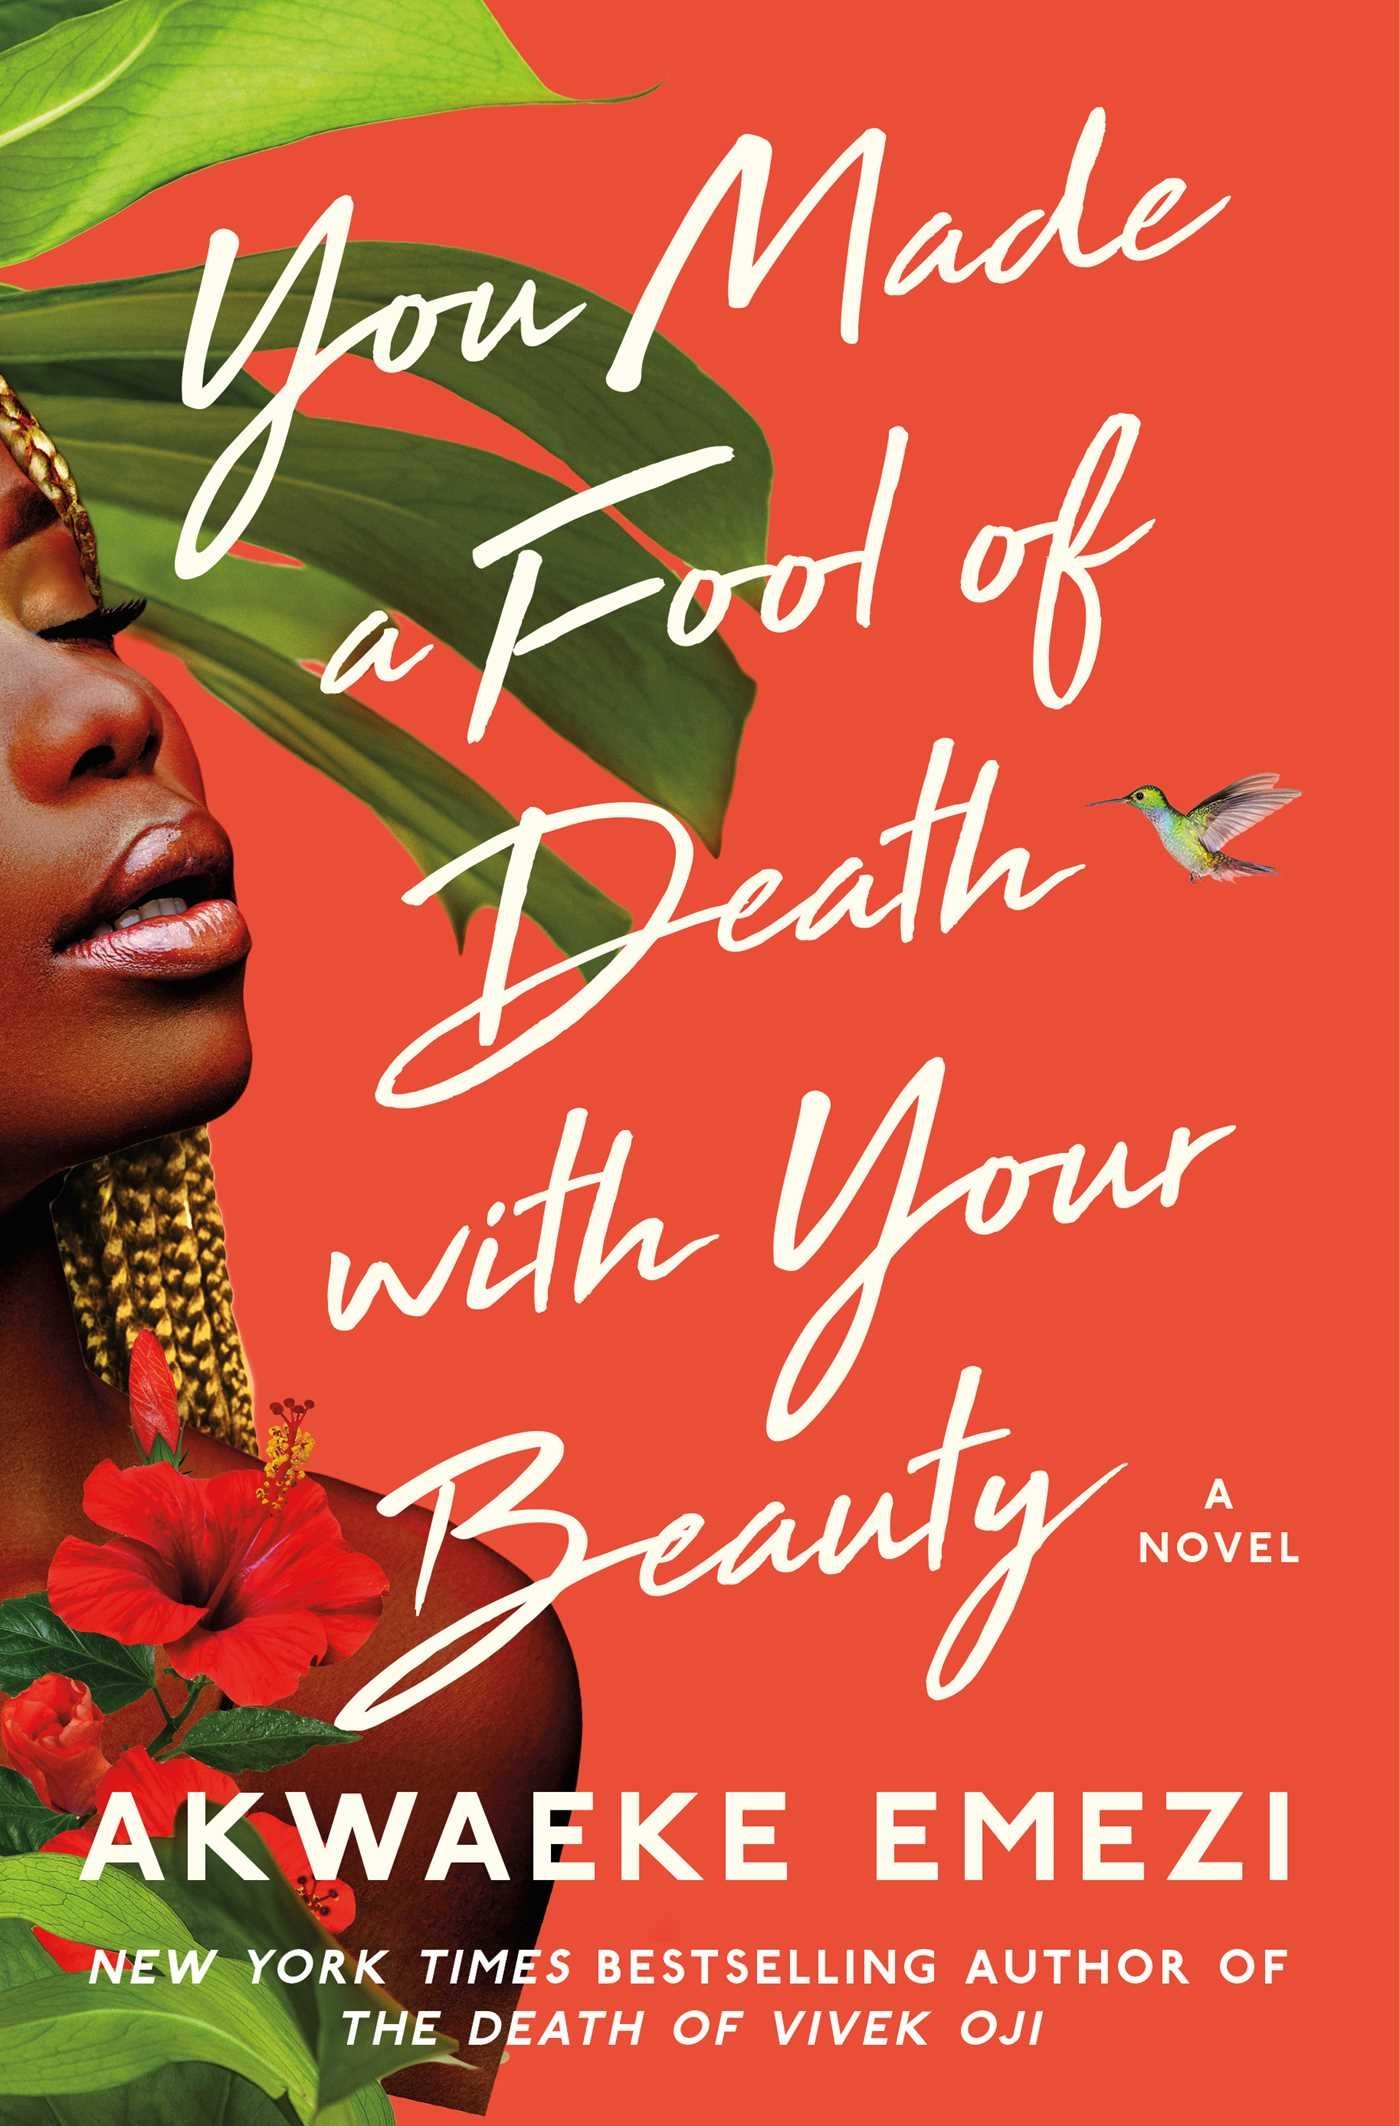 &quot;You Made a Fool of Death with Your Beauty&quot; cover showing a woman closing her eyes